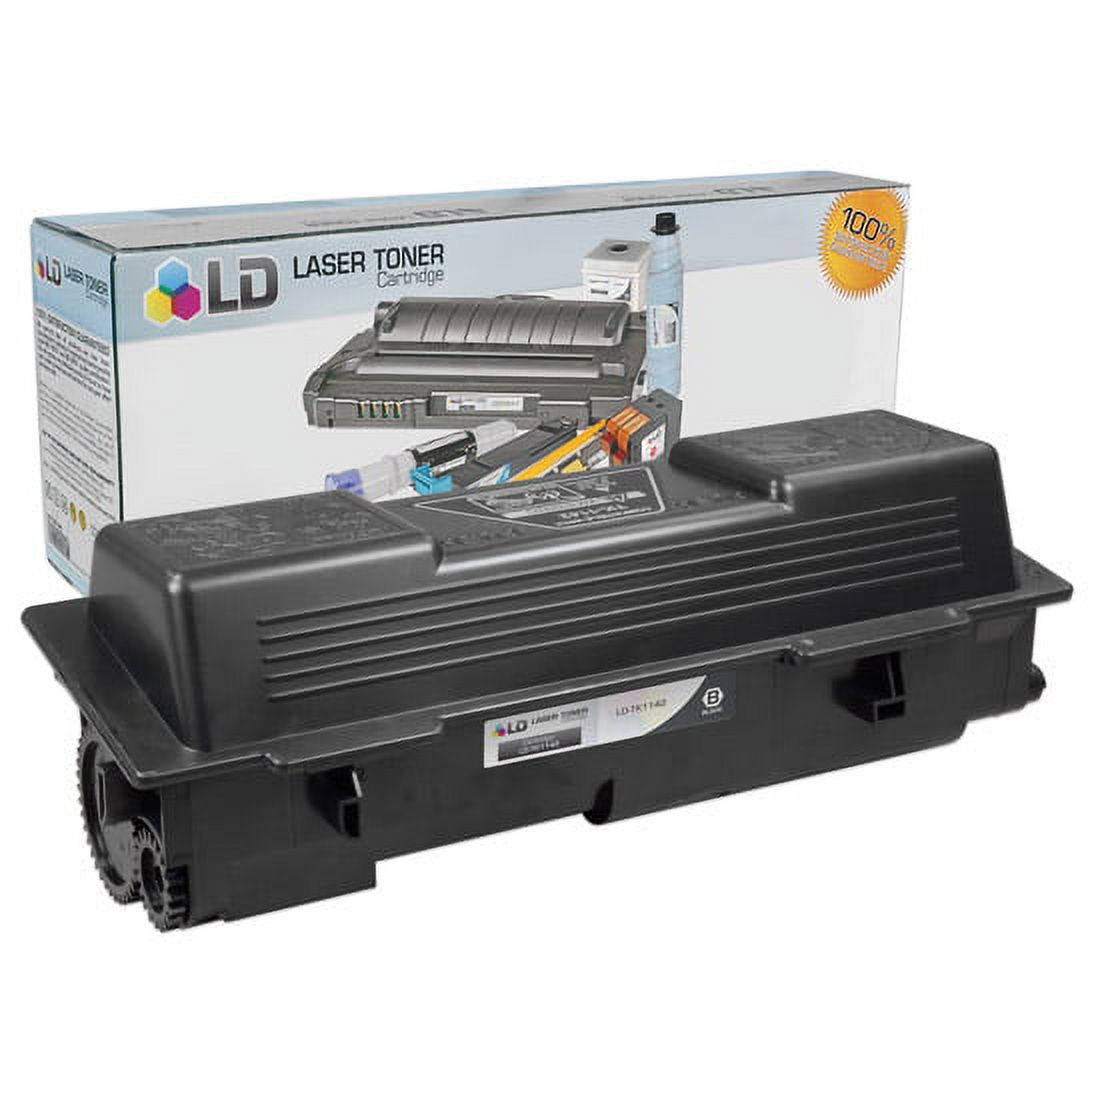 LD Compatible Replacement for Kyocera-Mita TK-1142 Black Laser Toner Cartridge for use in Kyocera-Mita FS-1035 MFP, FS-1135 MFP, and Laser M2035dn s - image 1 of 1